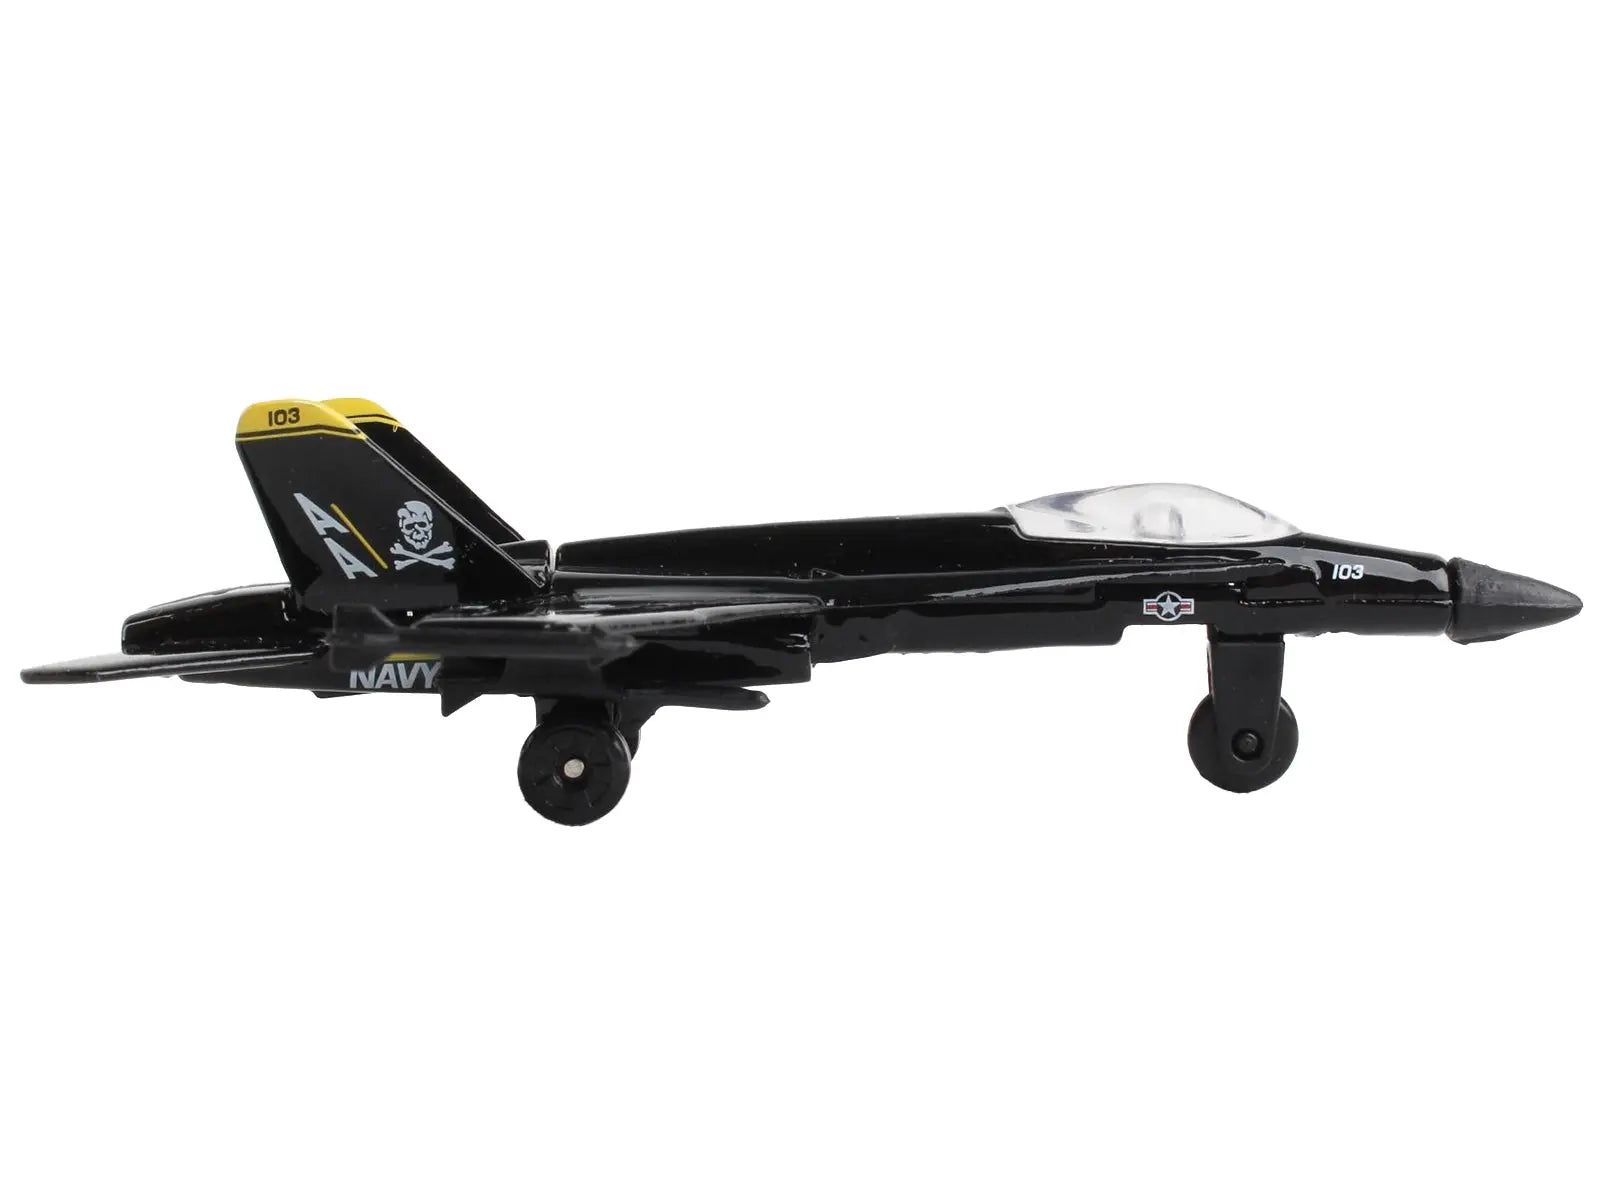 McDonnell Douglas F/A-18 Hornet Fighter Aircraft Black "United States Navy" with Runway Section Diecast Model Airplane by Runway24 Runway24